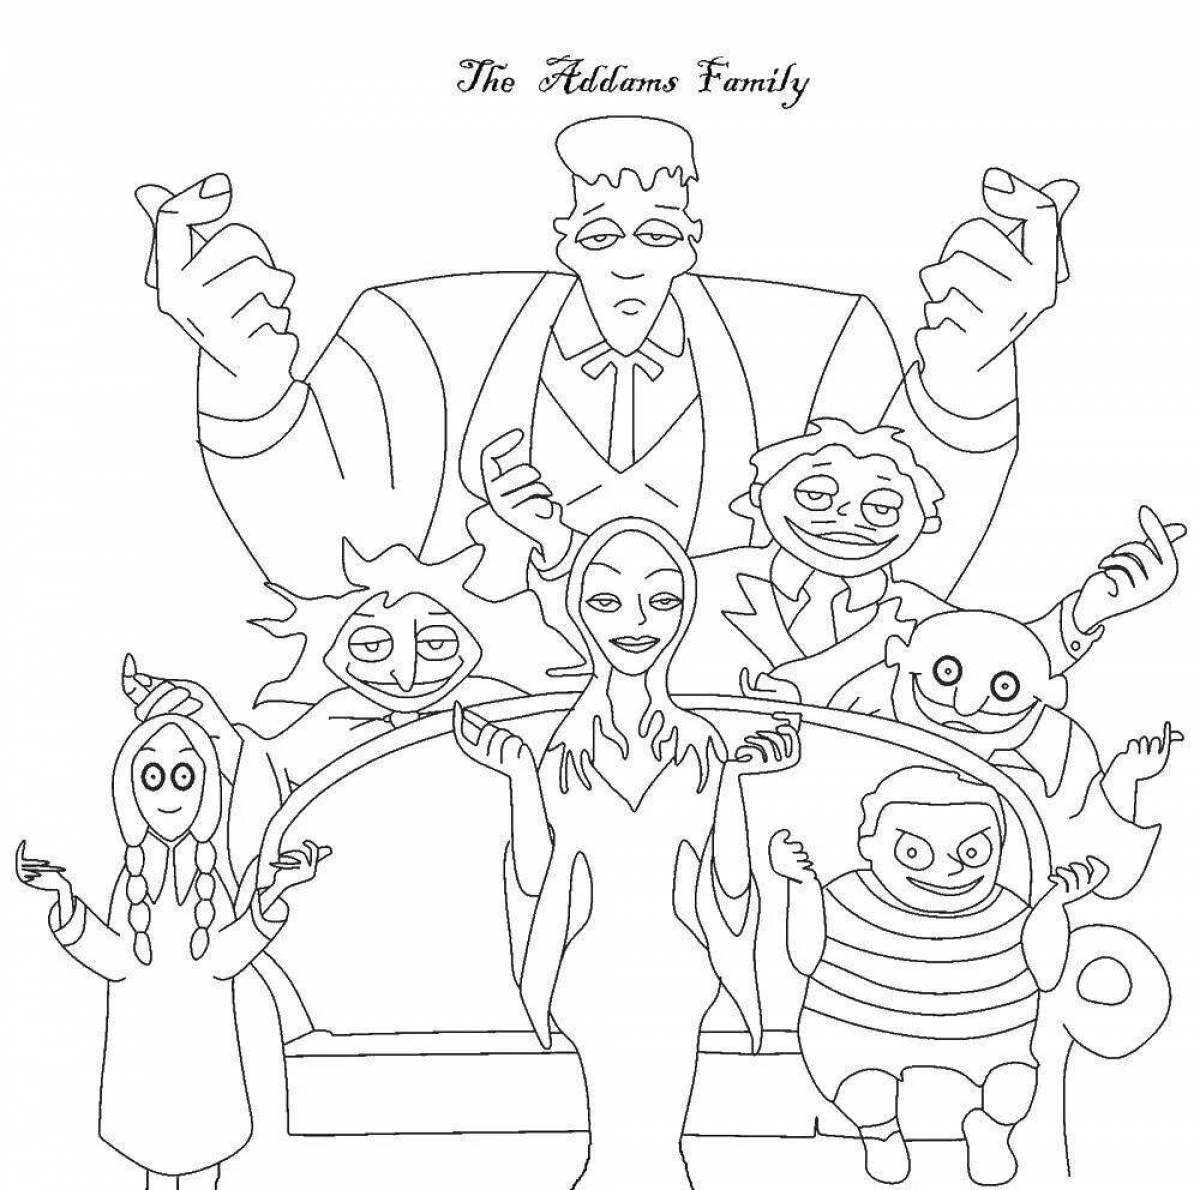 Amazing adams wednesday coloring page